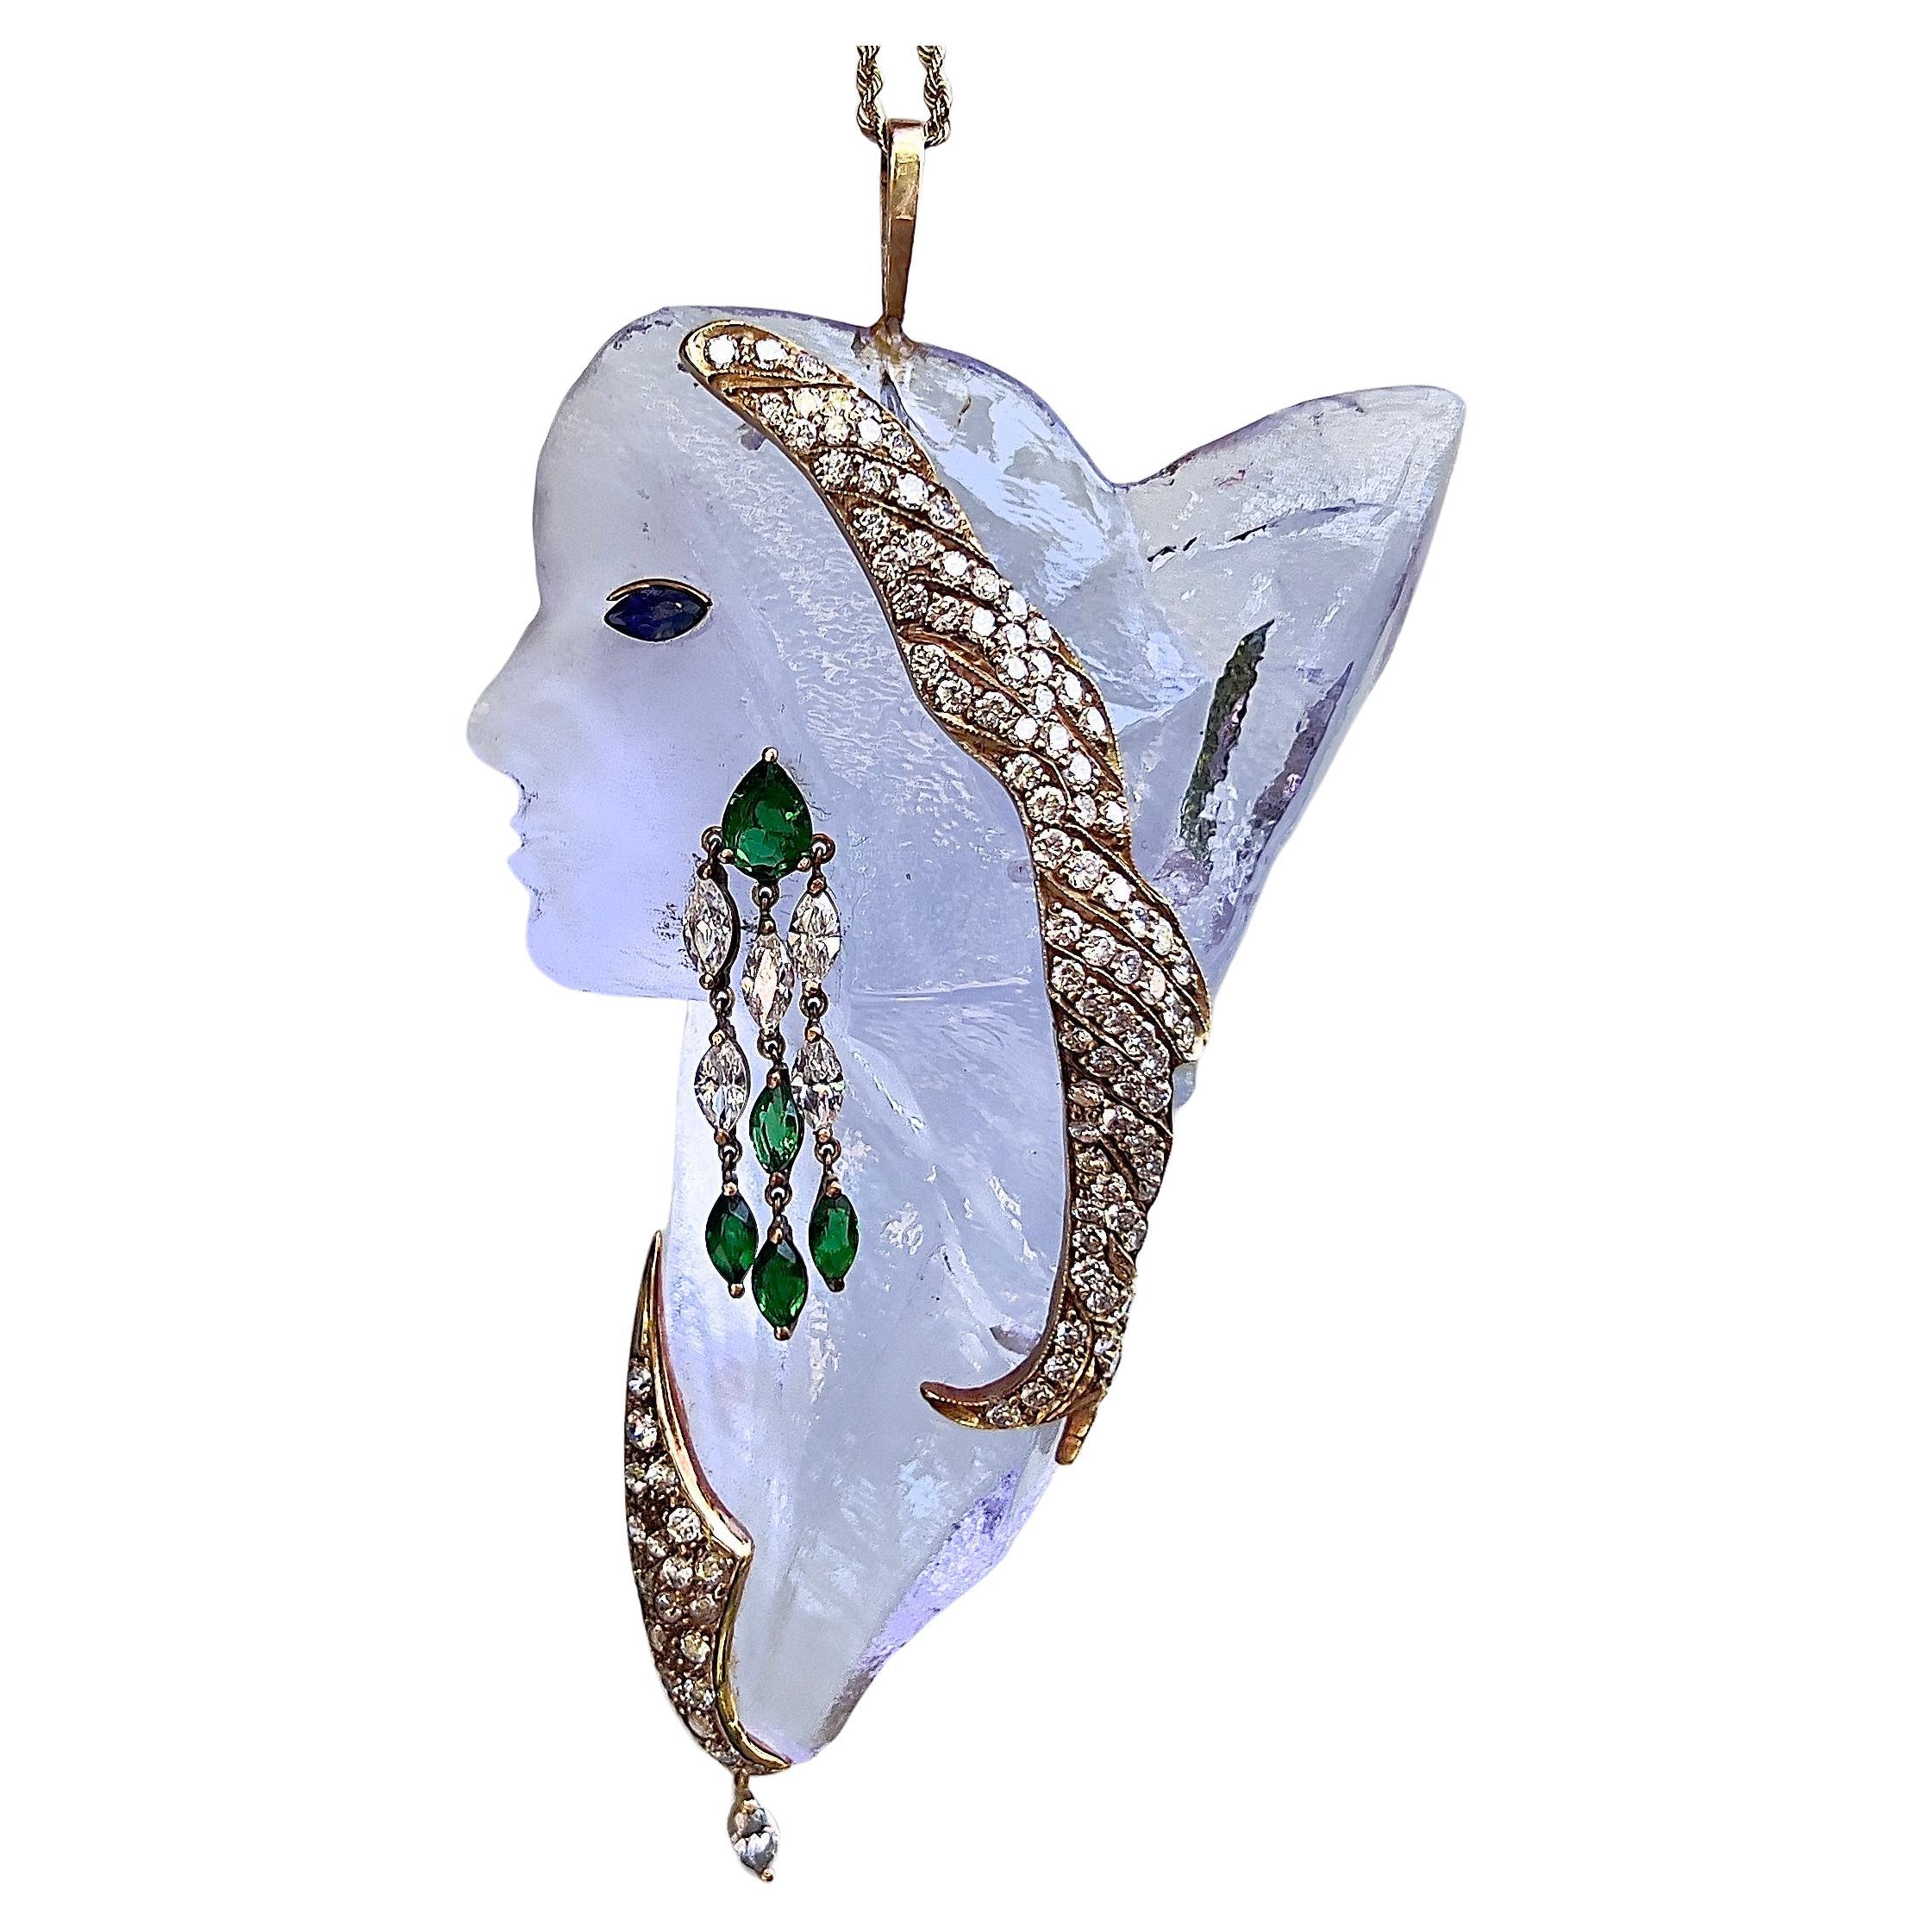 Jewelry Piece hand-carved by the renowned Suzanne Regan Pascal

A breathtaking chiseled carved and polished glass Pendant by the talented artist Suzanne Pascal. Her style is Iconic. When you read her biography below, you will understand. This